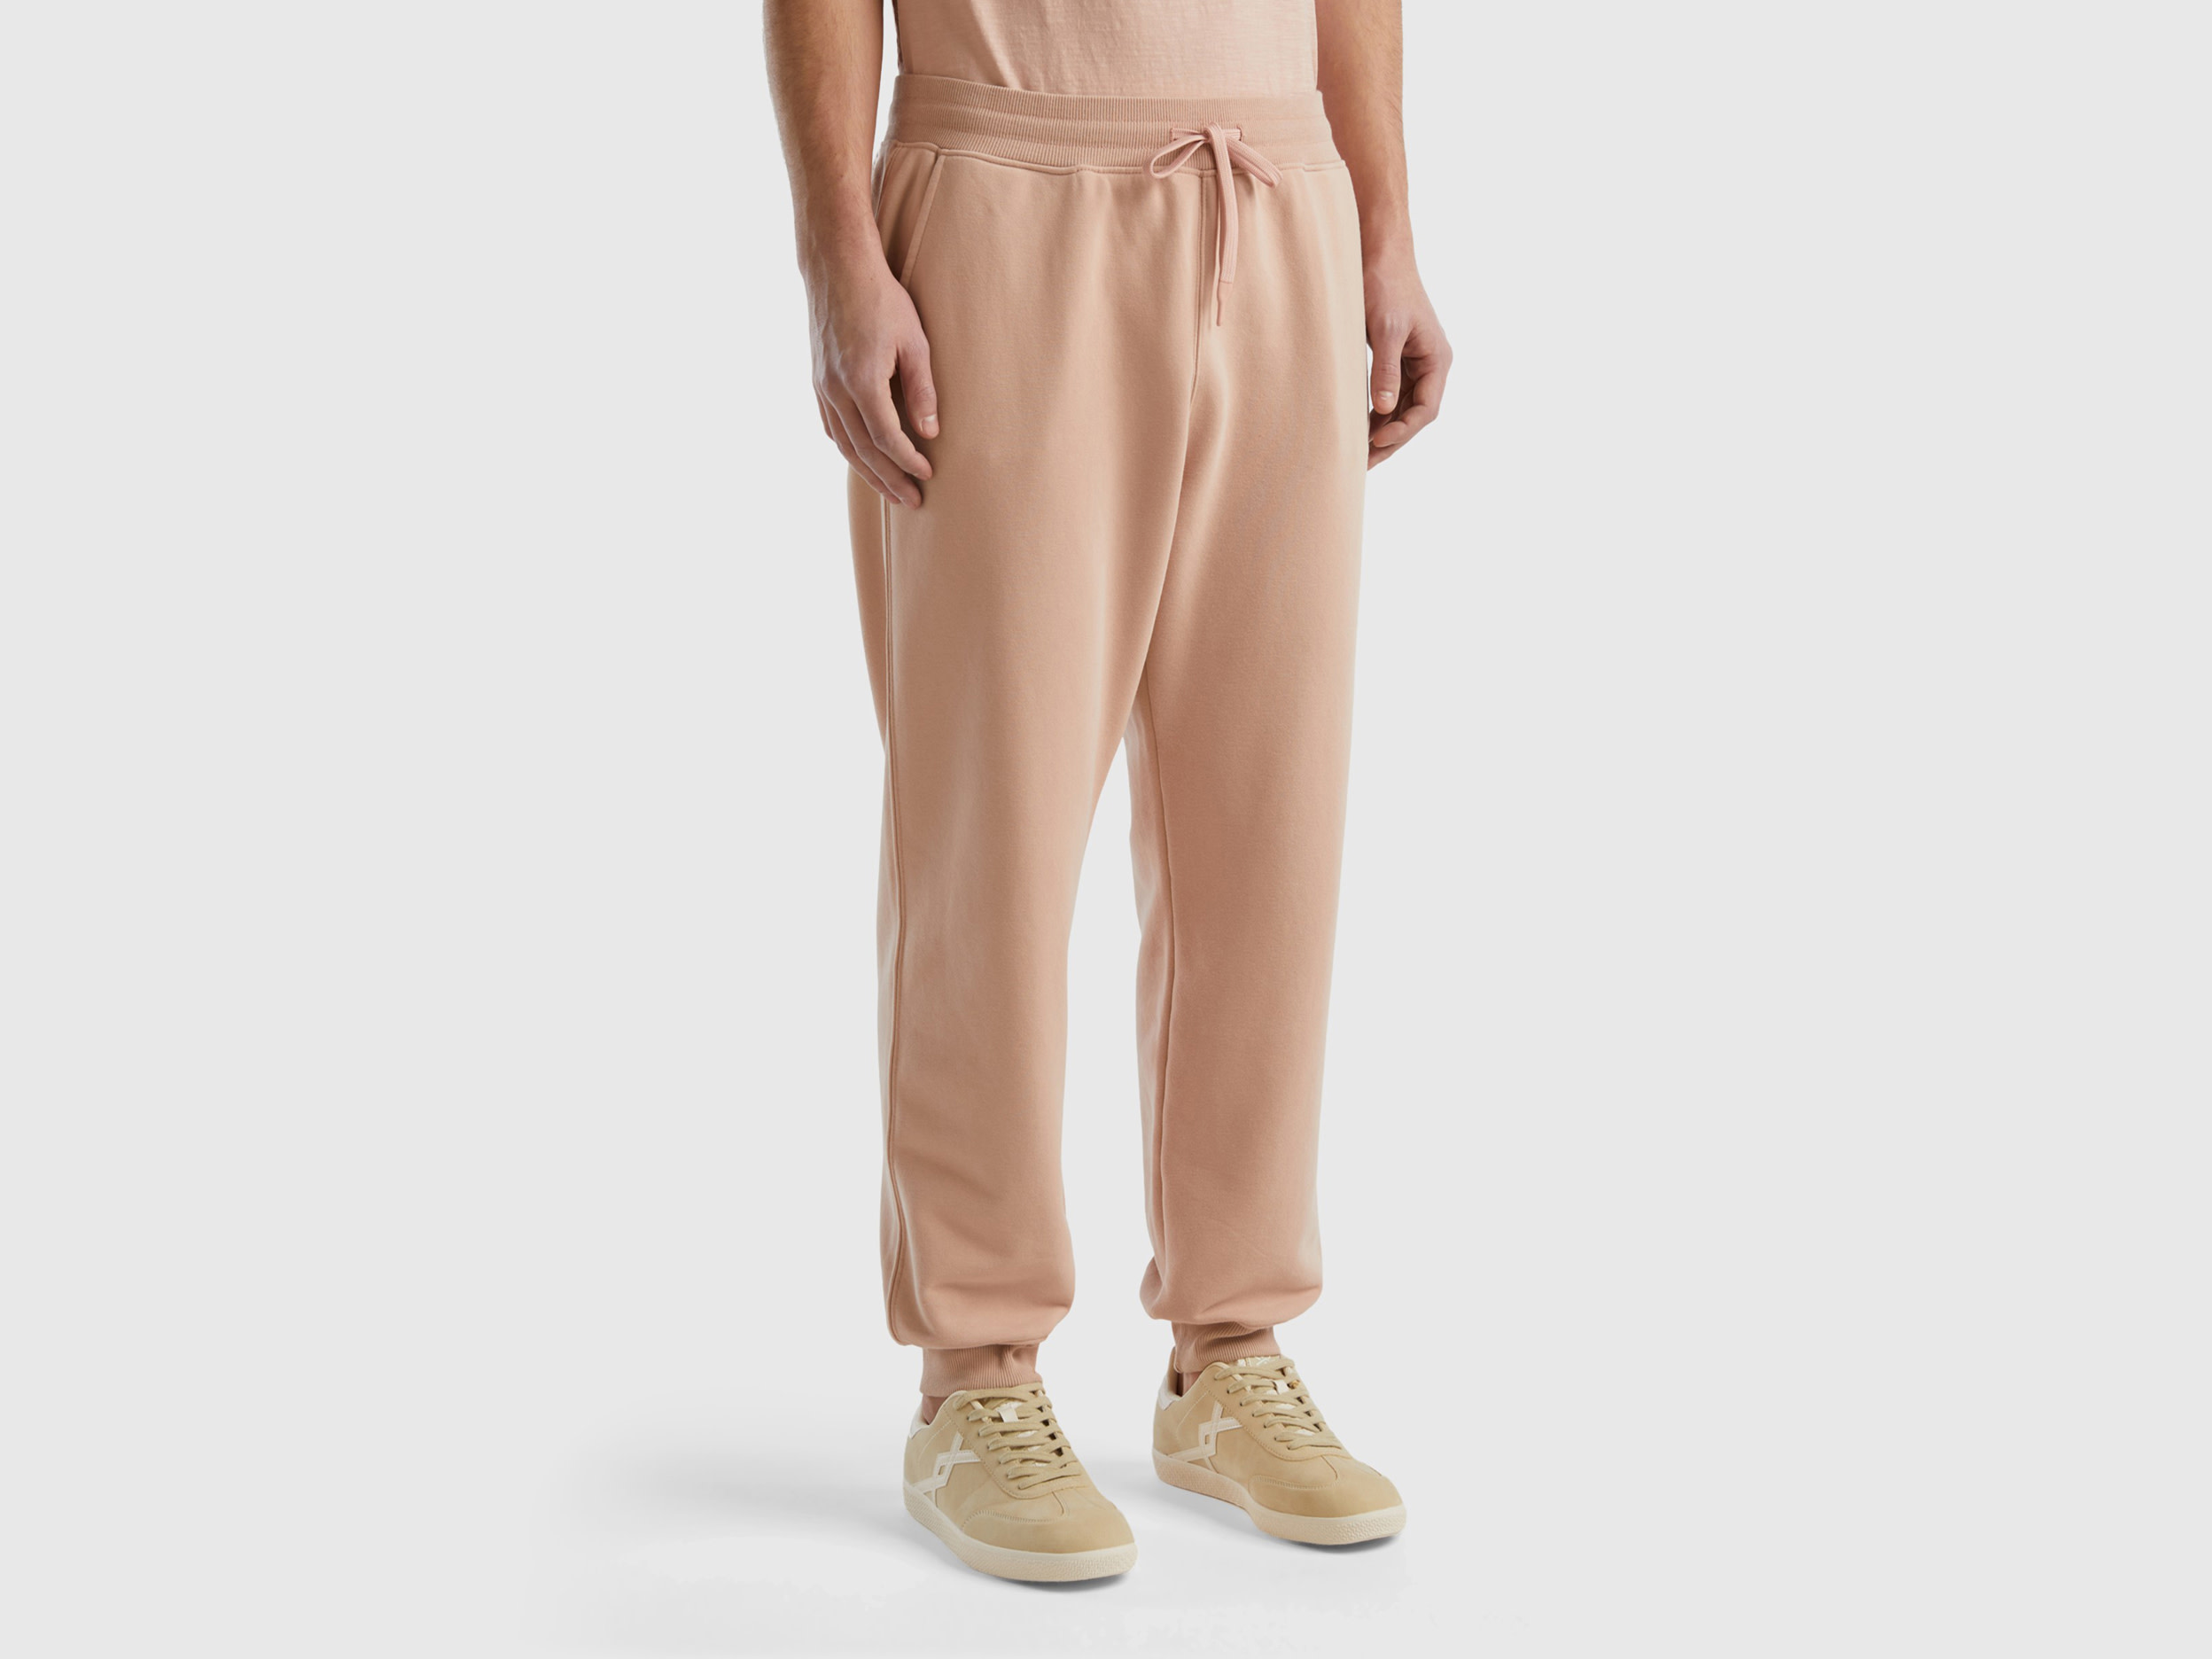 Image of Benetton, Joggers In Organic Cotton Blend, size L, Nude, Men